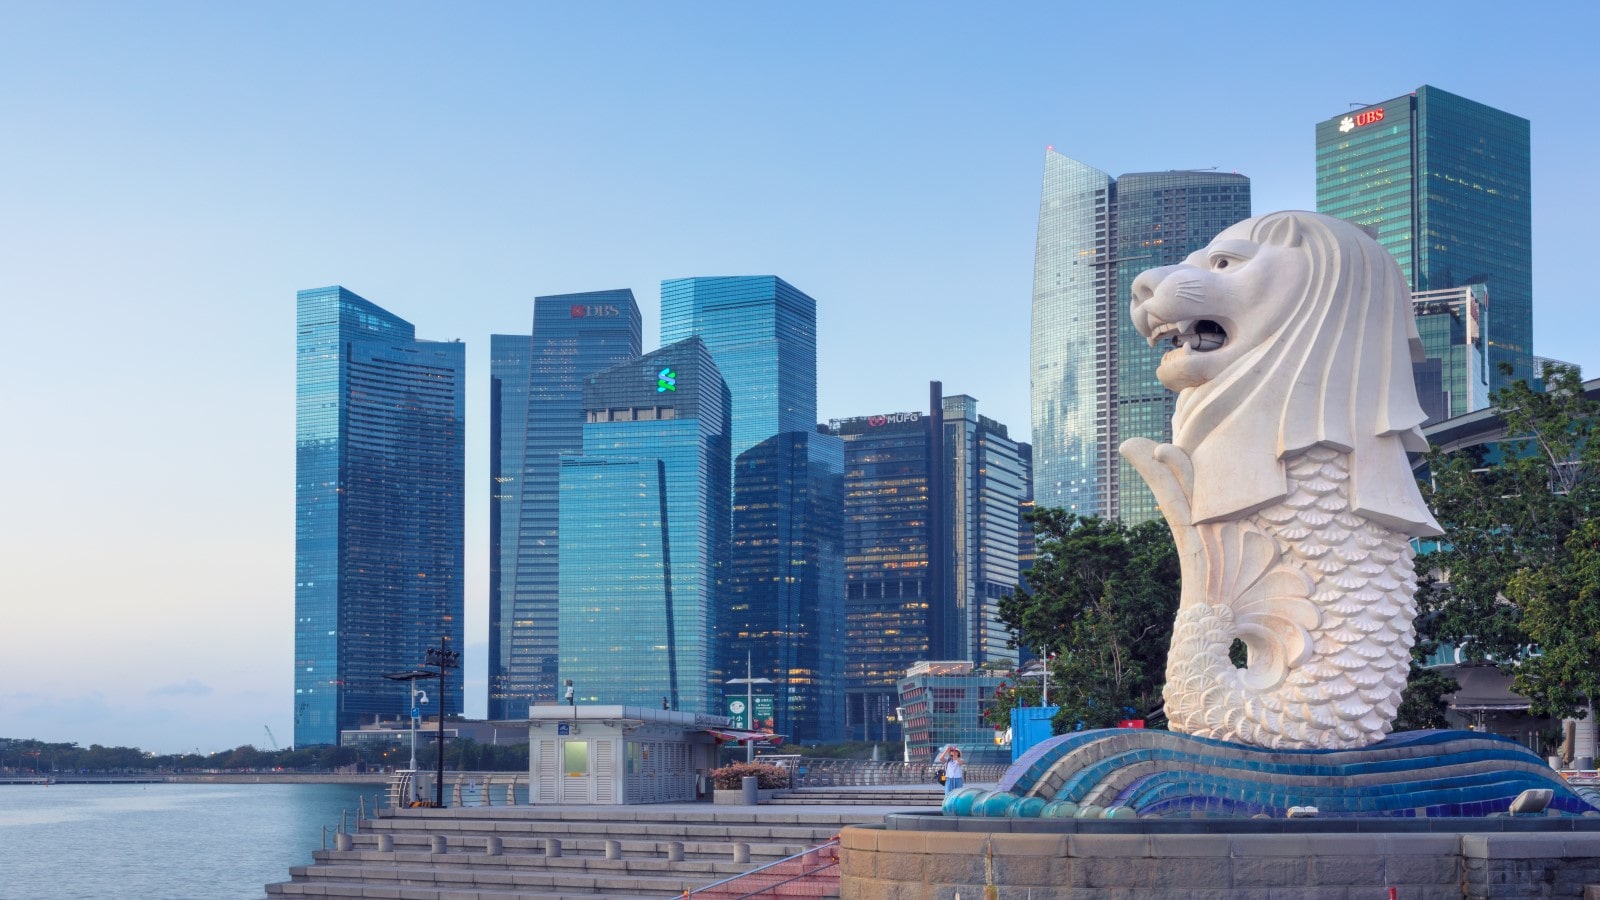 View of the merlion statue of Merlion Park, and the financial district in downtown Singapore.